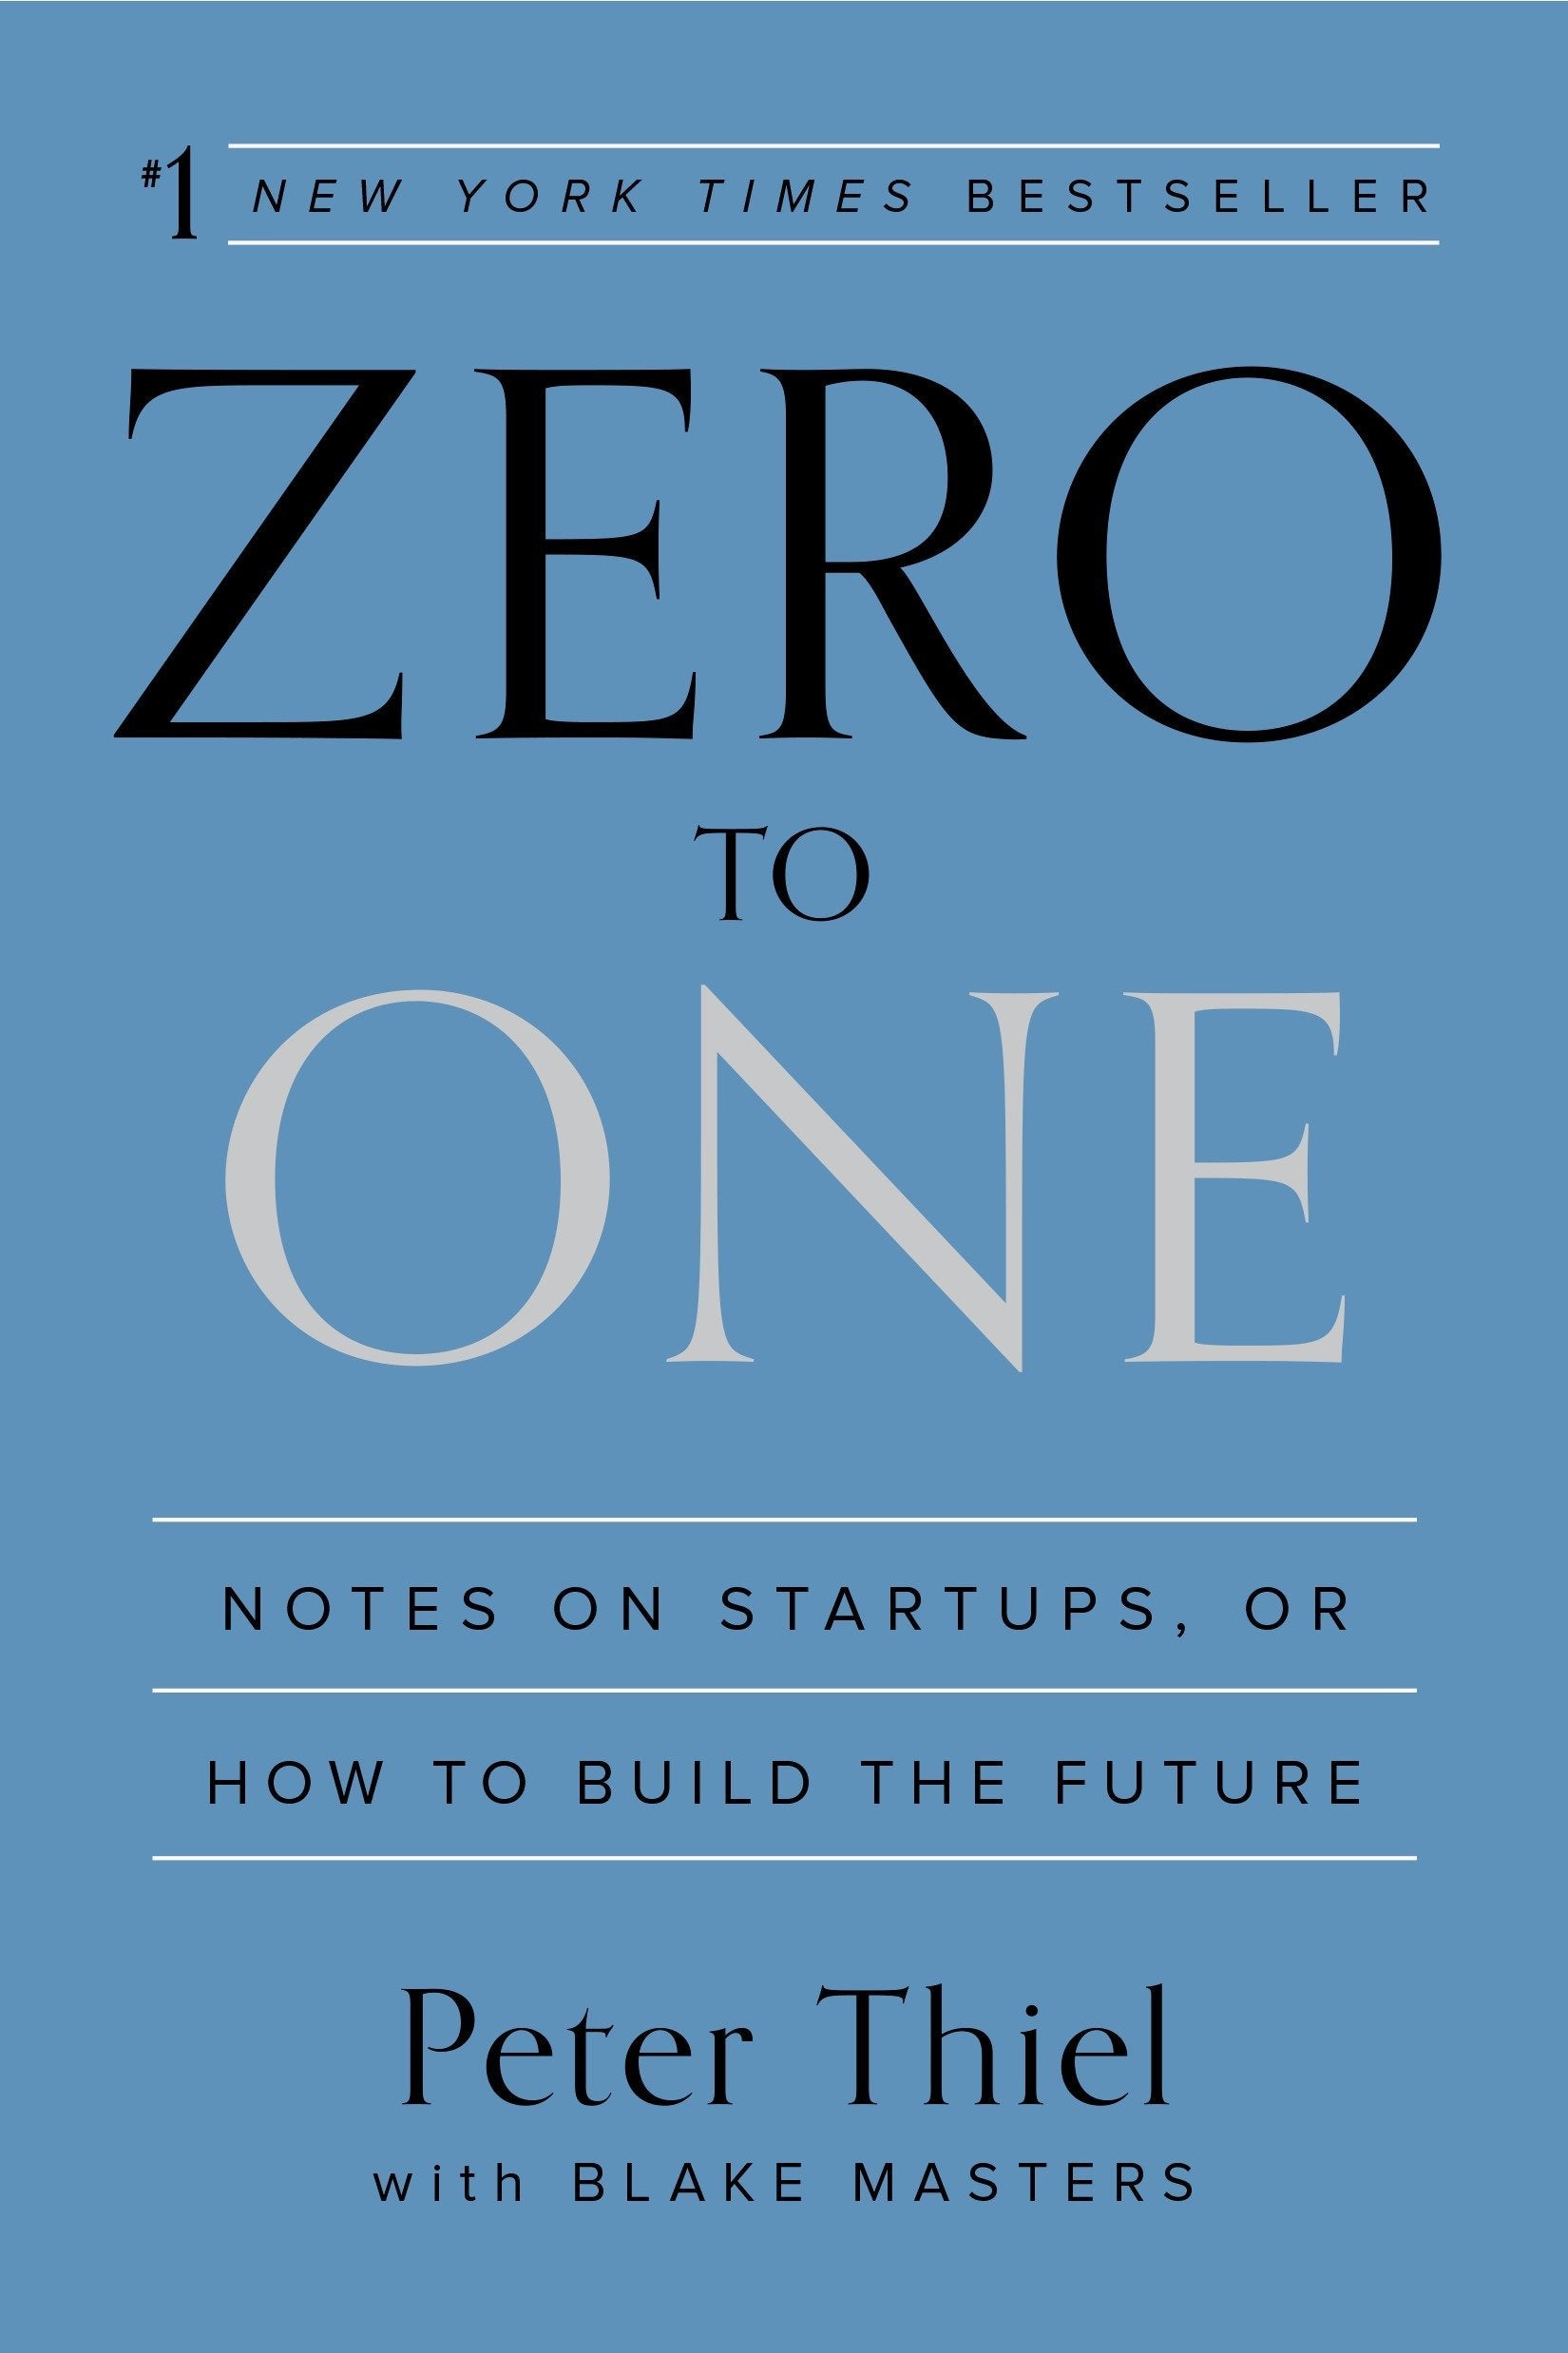 Zero to One: Notes on Startups, or How to Build the Future Hardcover by Peter Thiel  (Author), Blake Masters  (Author)